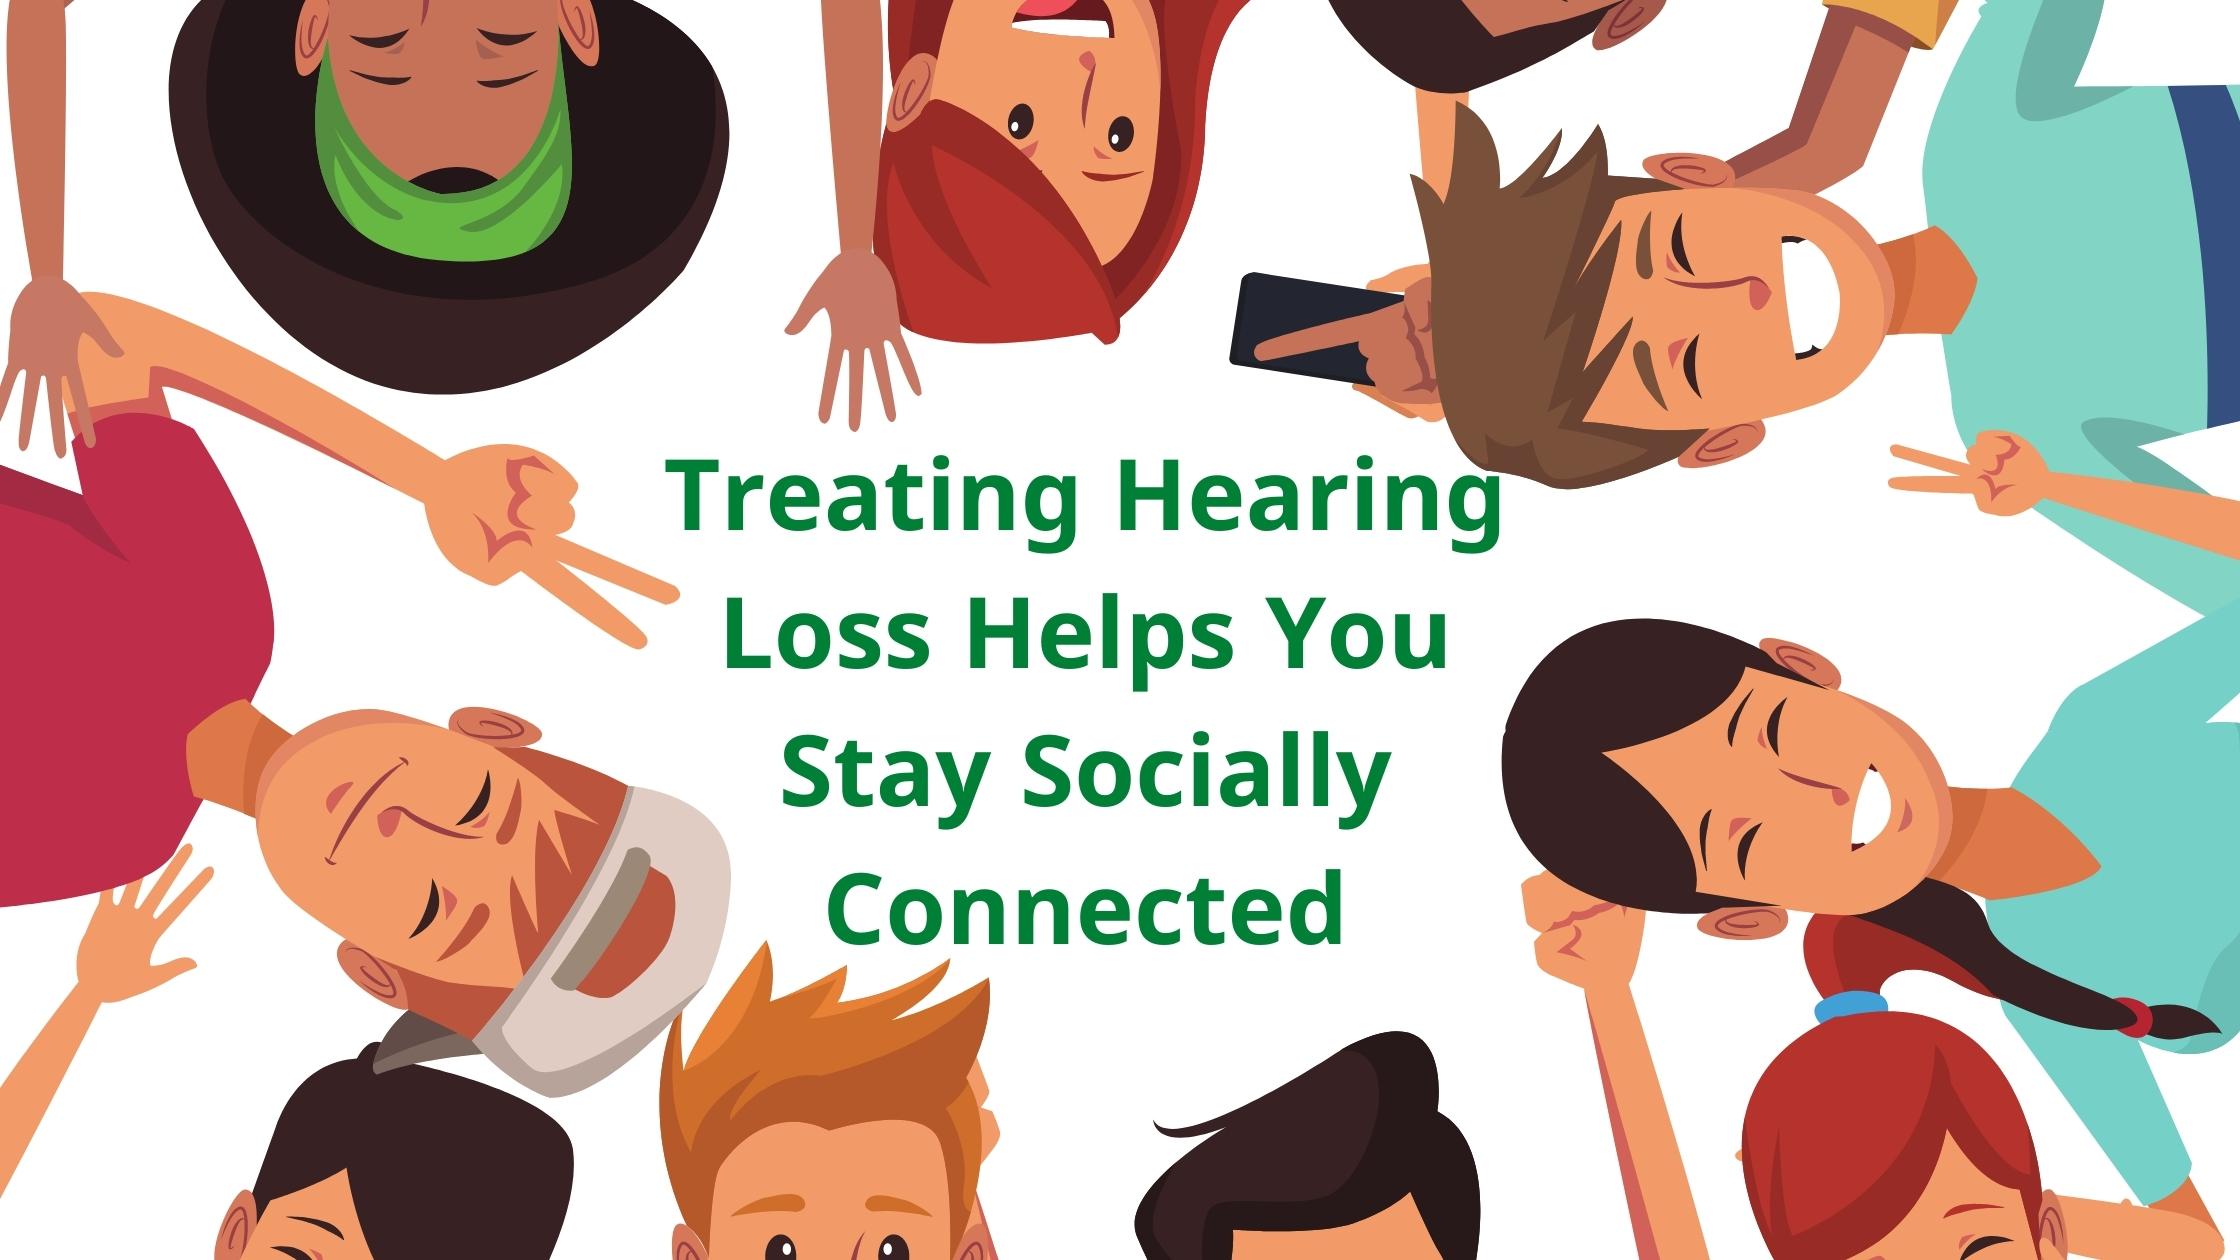 Featured image for “Treating Hearing Loss Helps You Stay Socially Connected”